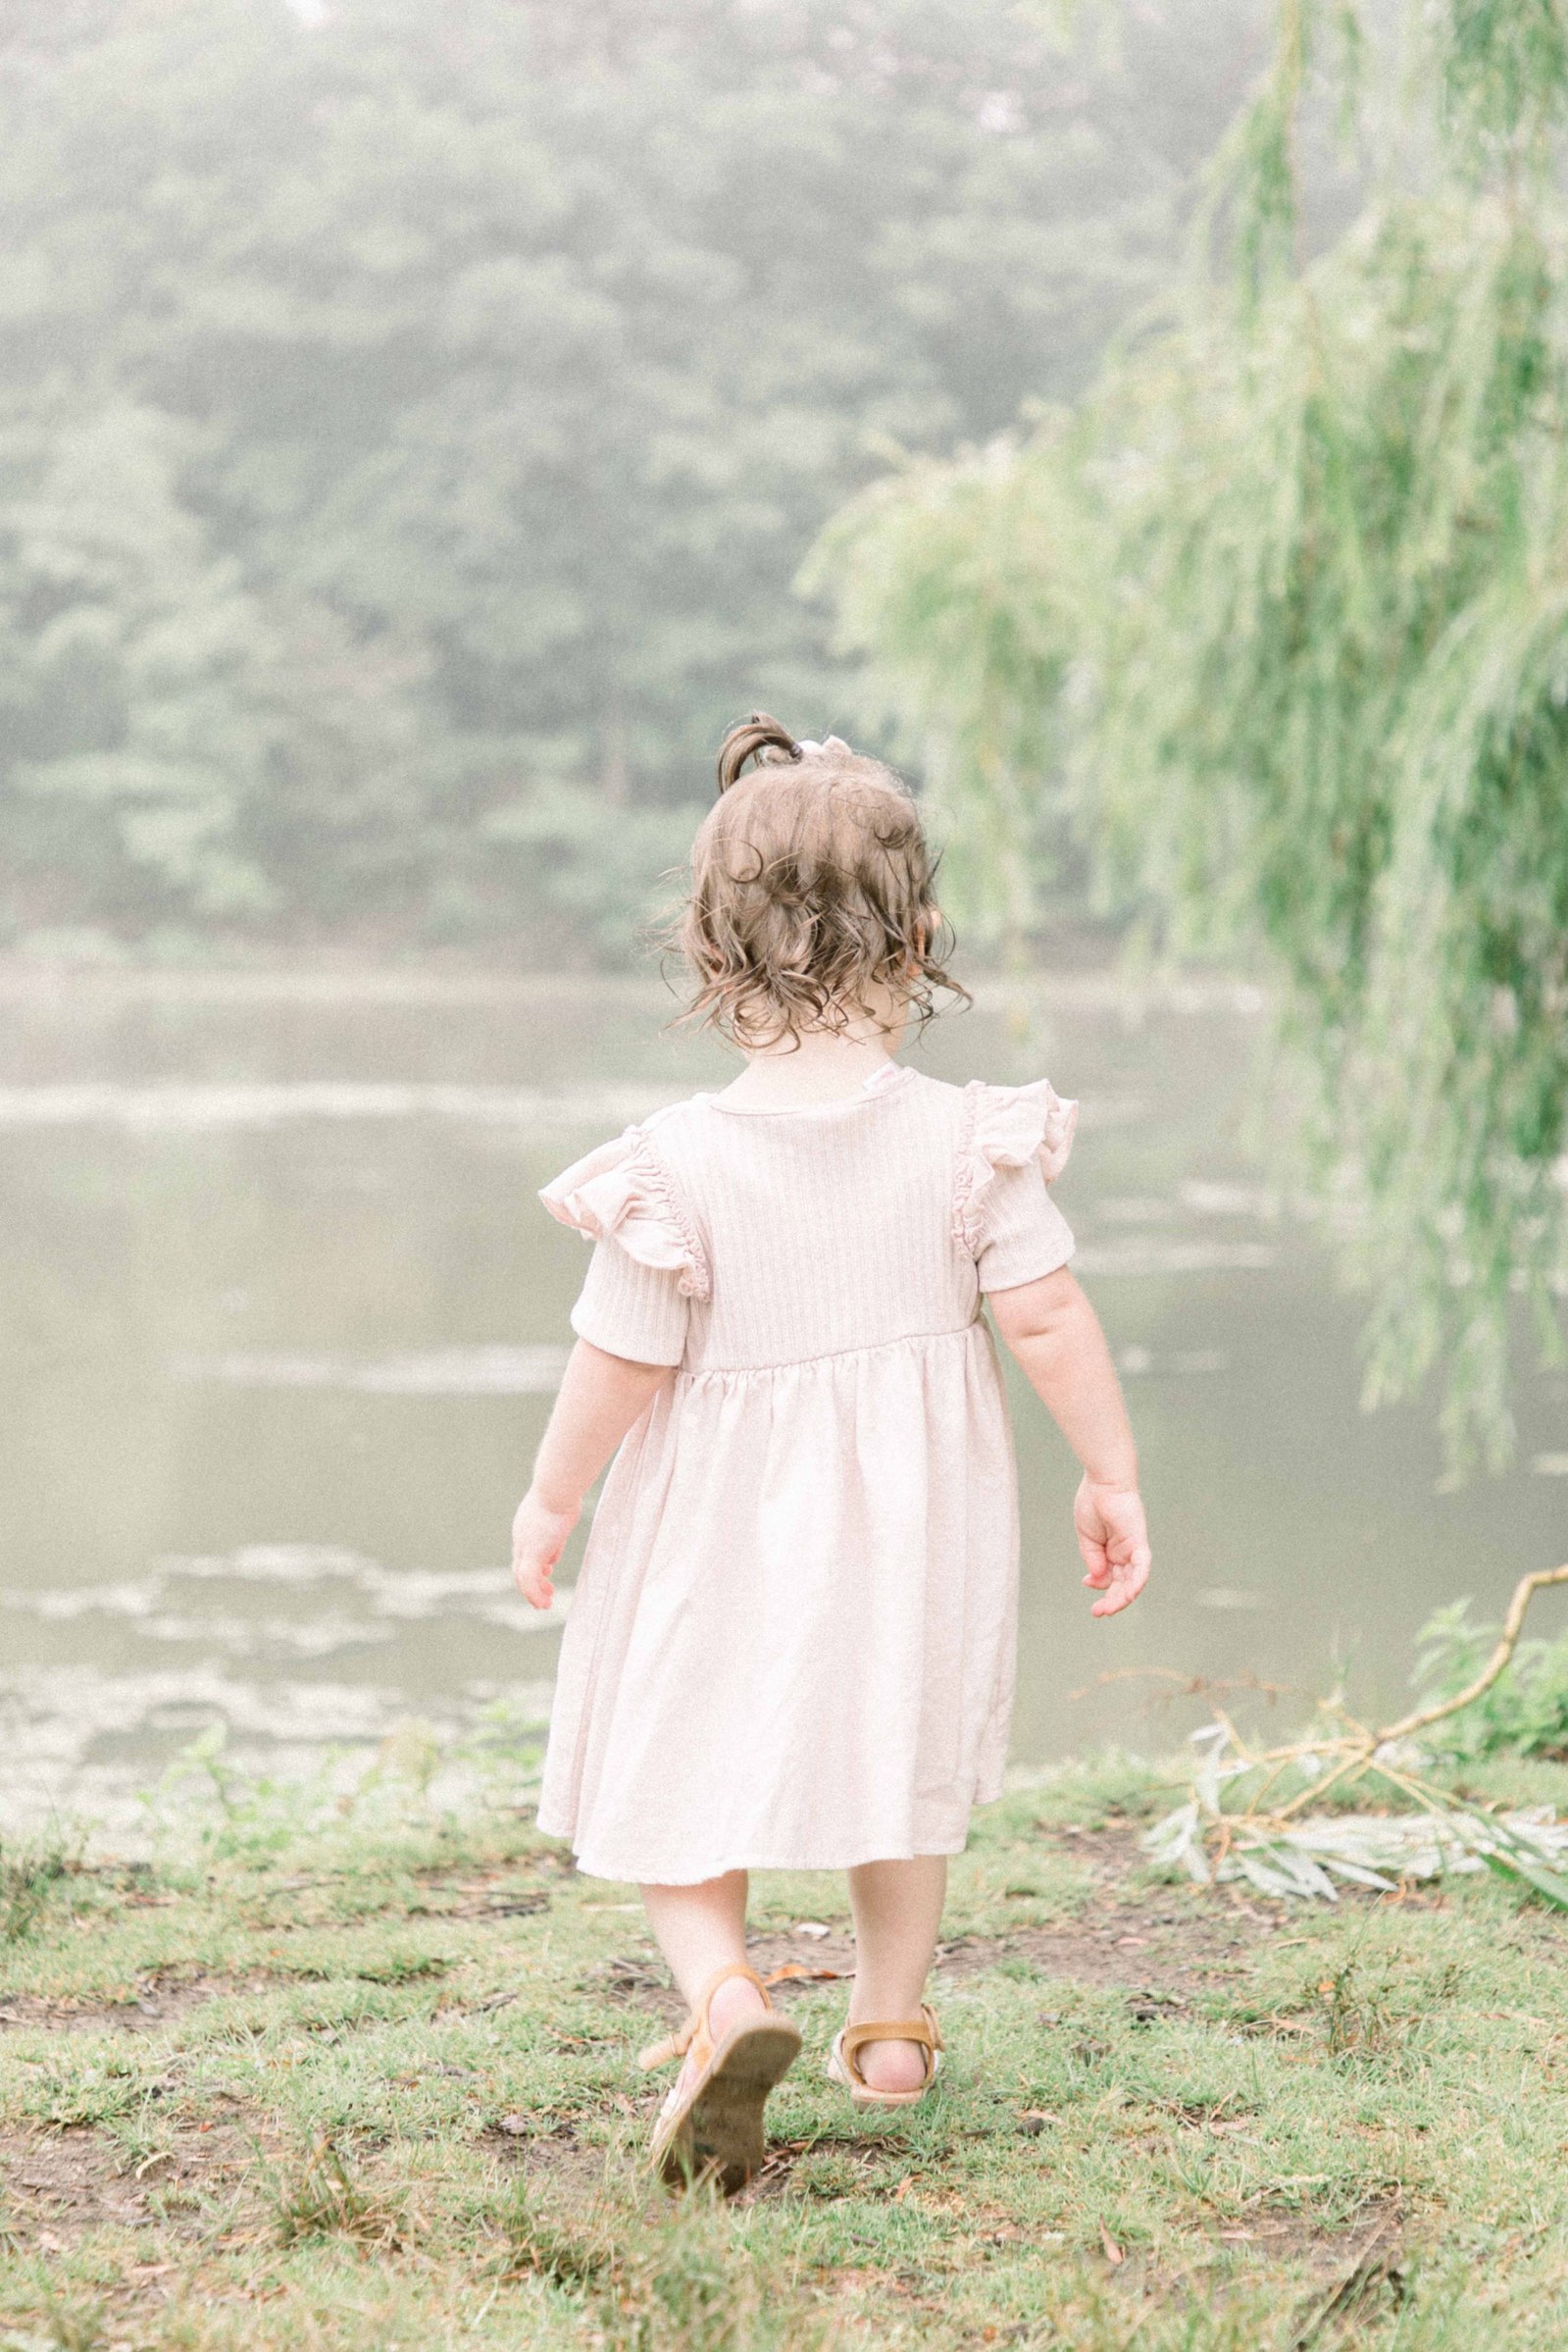 Portrait of little girl walking towards the water by a willow tree, Niagara Portrait Photographer, Niagara Family Photographer, Niagara Motherhood Photography, Beach Portrait Photography, Emily VanderBeek Photography.